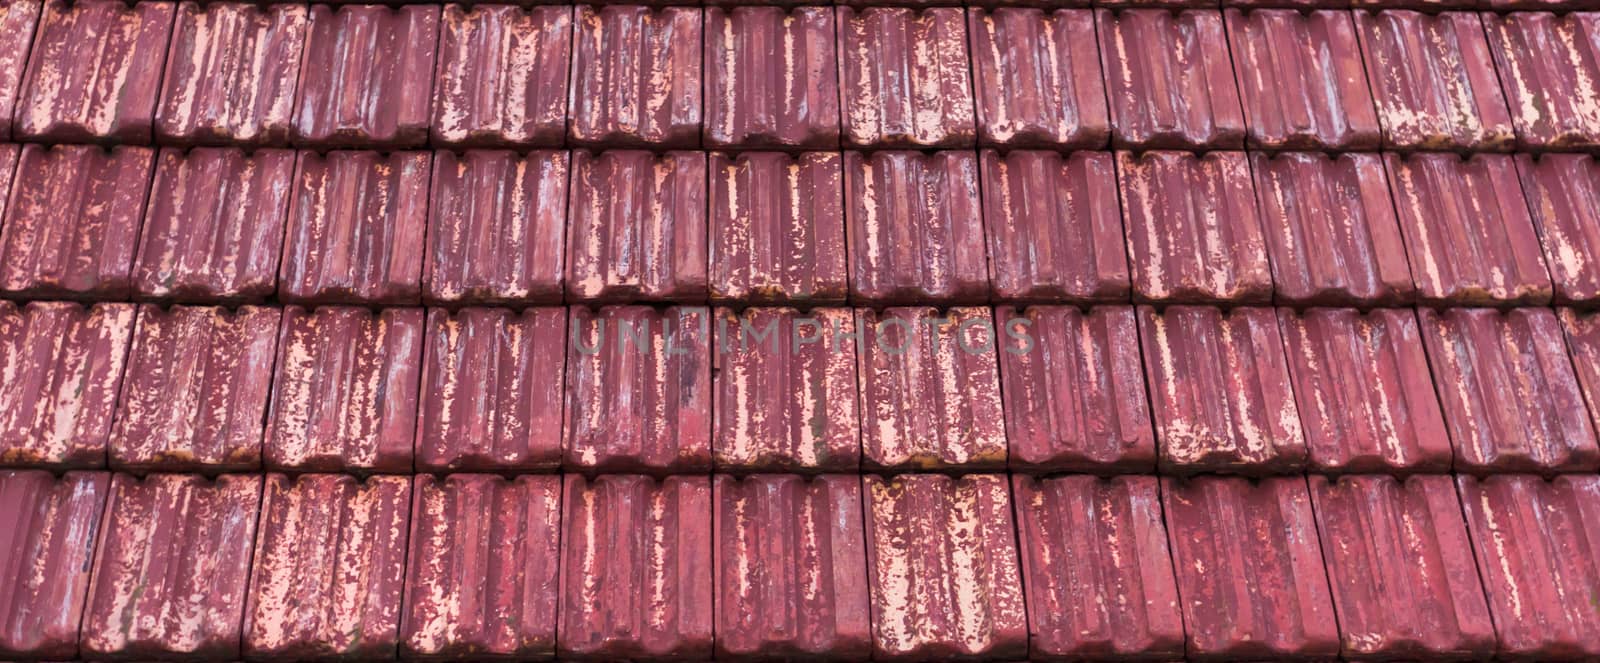 weathered and old red colored classic stone roof tiling with faded out colors, architecture pattern background